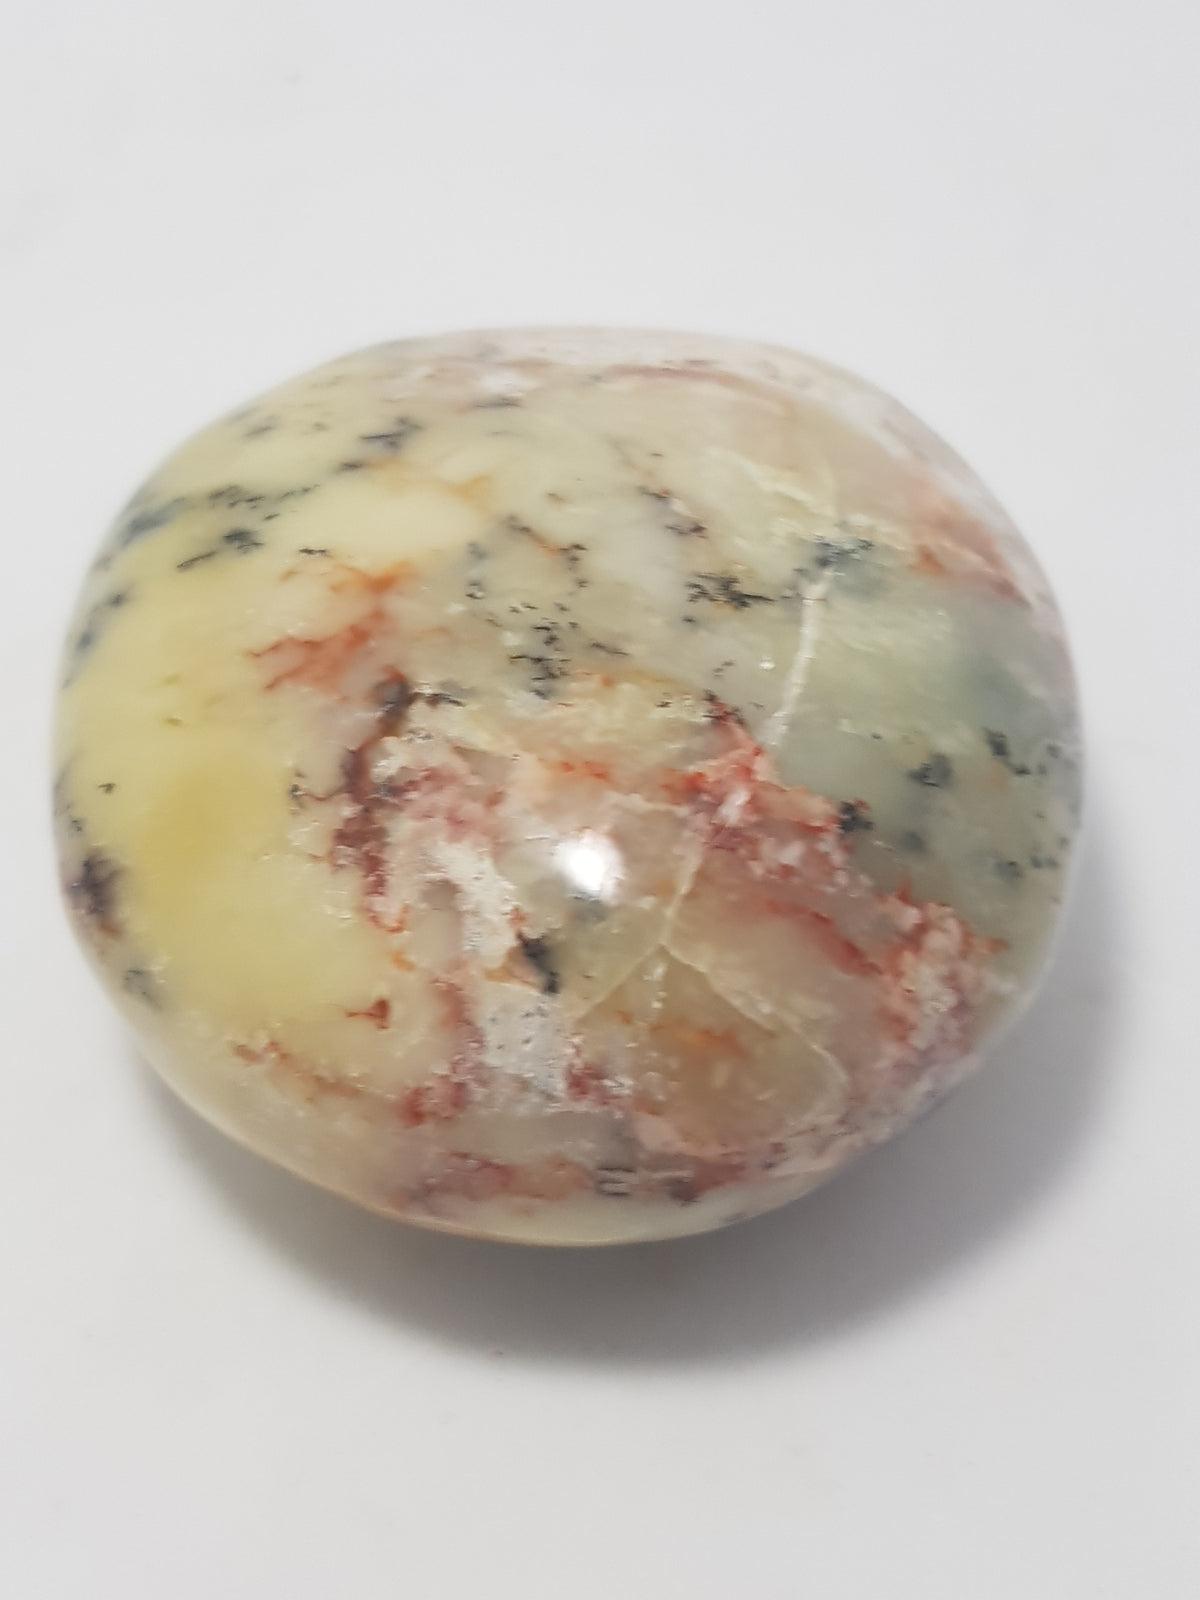 A polished pebble of light green opal. The opal contains black dendrites of psilomane as well as bands of an orange iron rich mineral